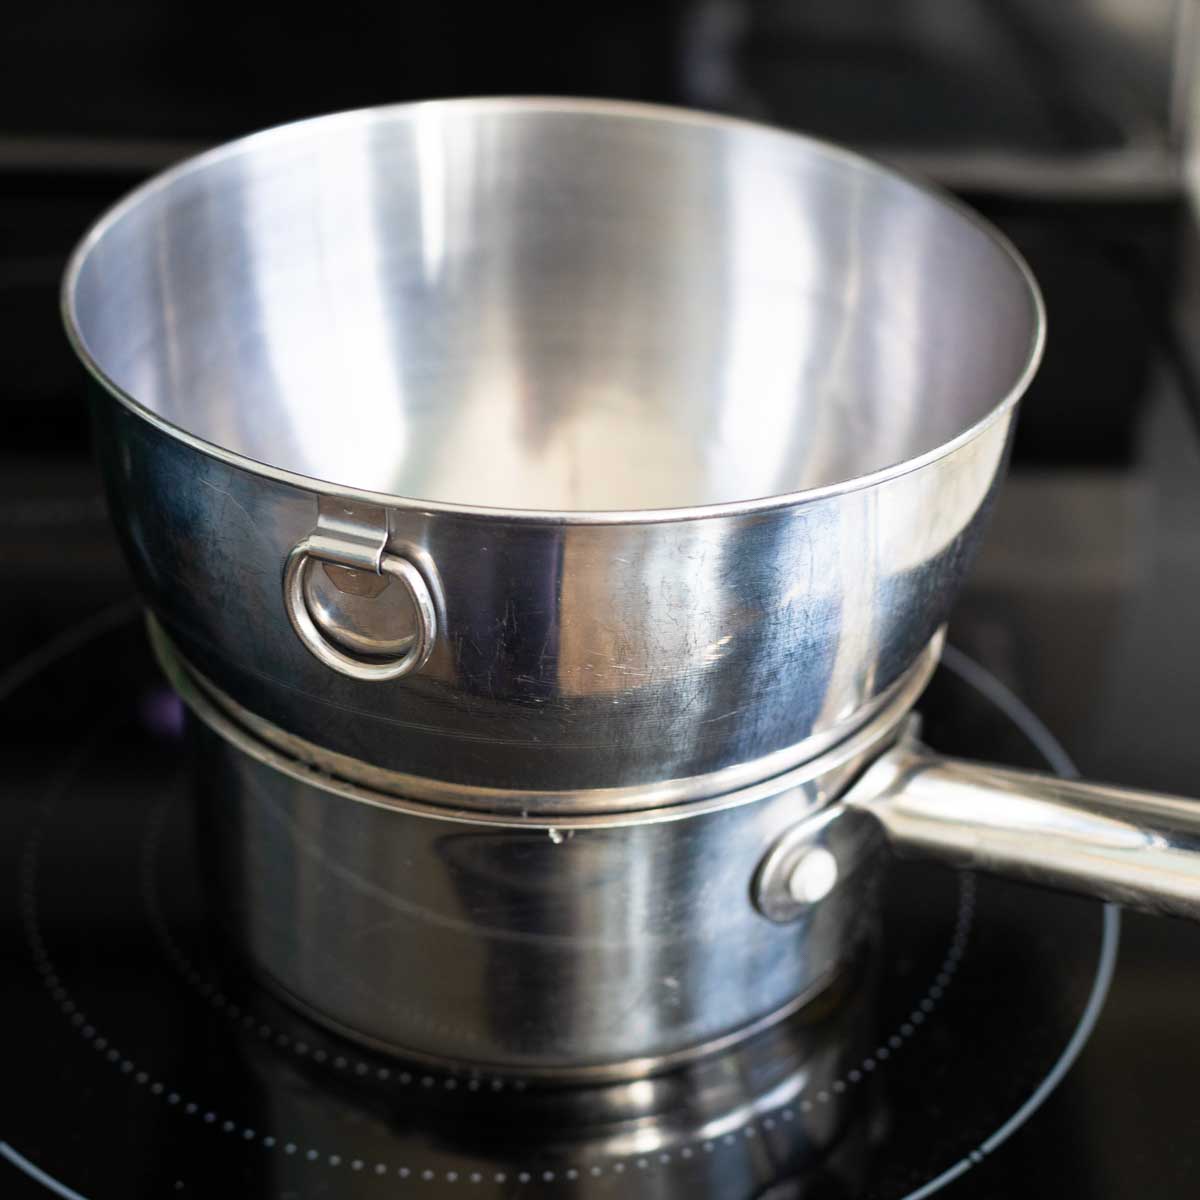 A double boiler has been made out of a regular kitchen saucepan and mixing bowl.